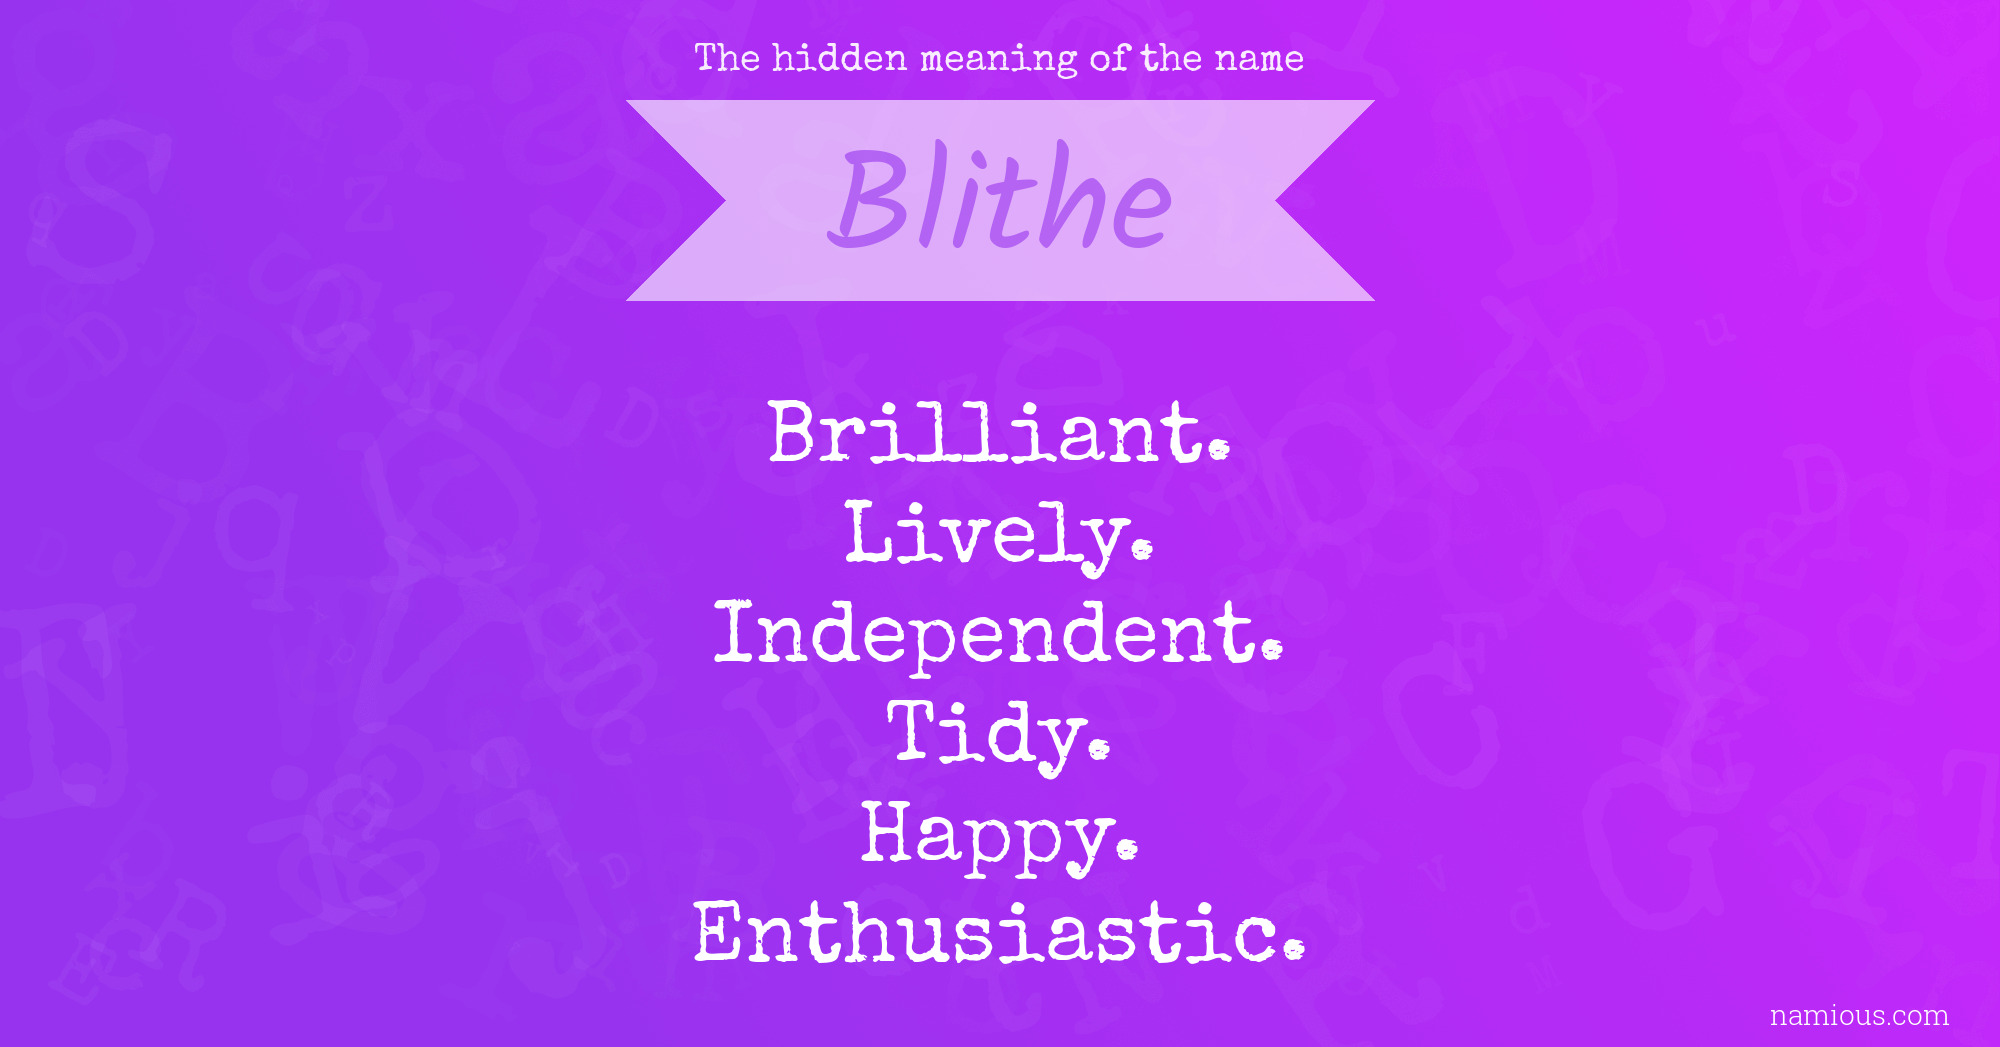 The hidden meaning of the name Blithe